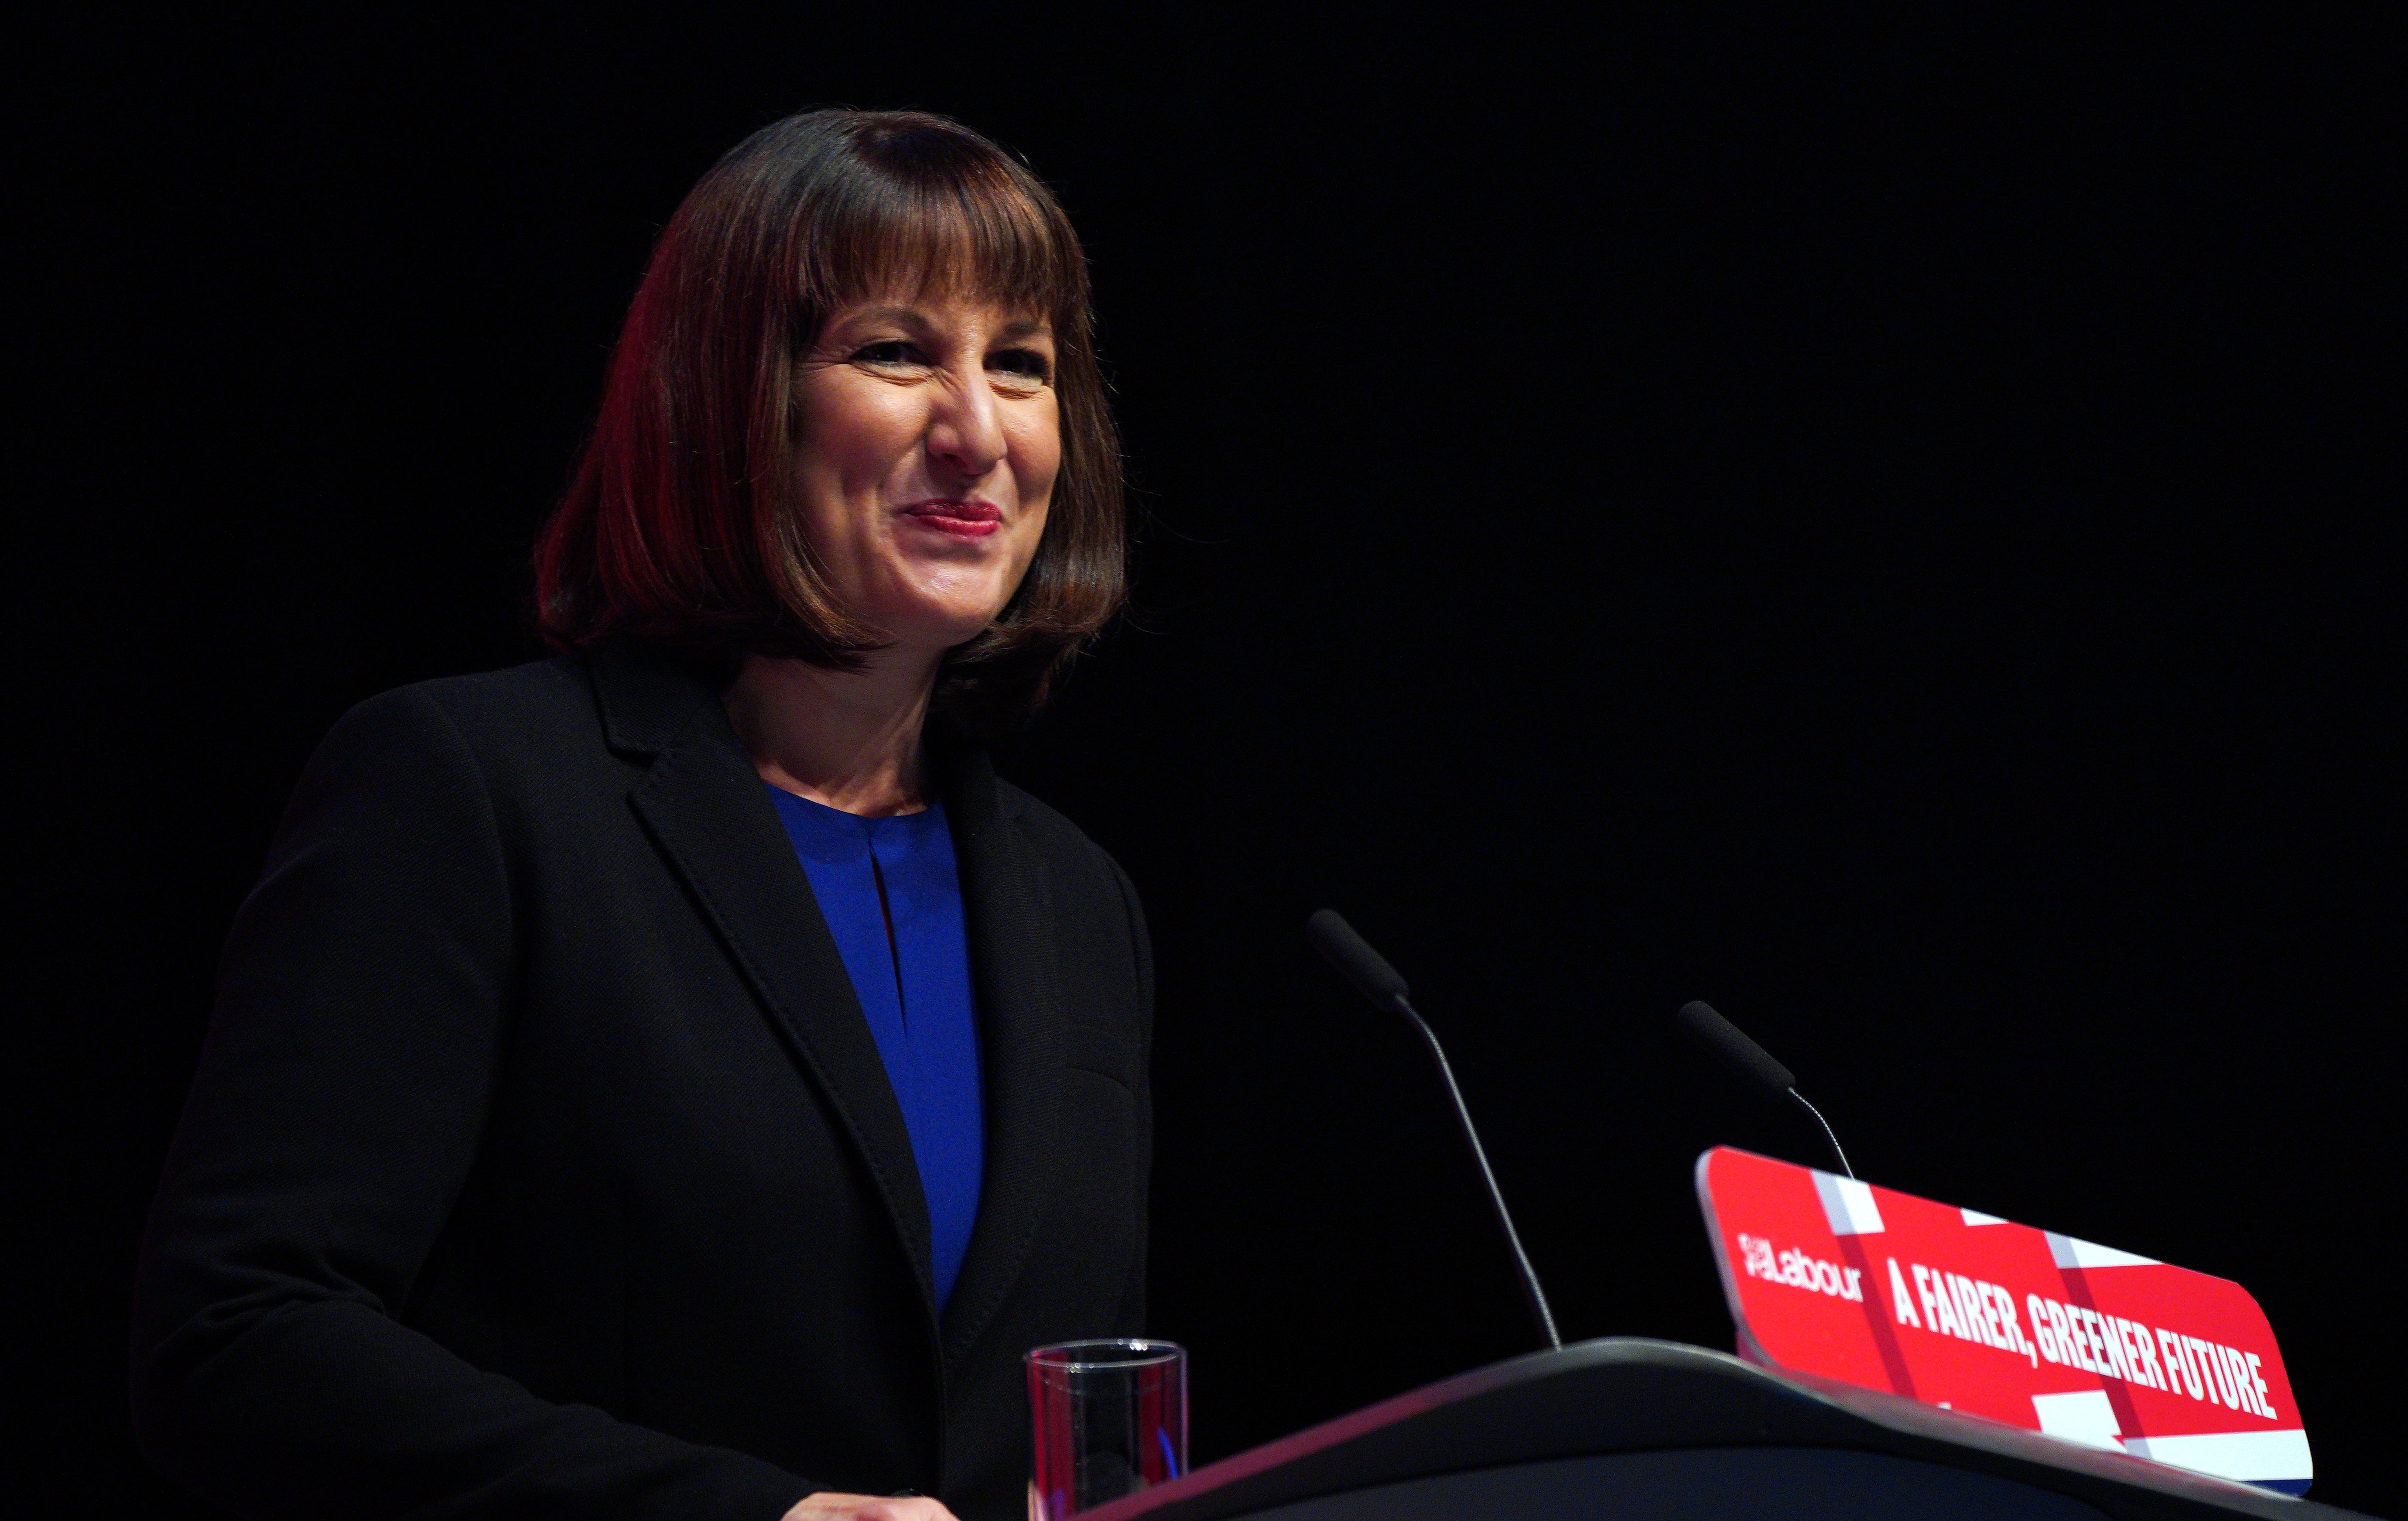 Rachel Reeves’ conference speech was described as ‘prudent’ (Peter Byrne/PA)